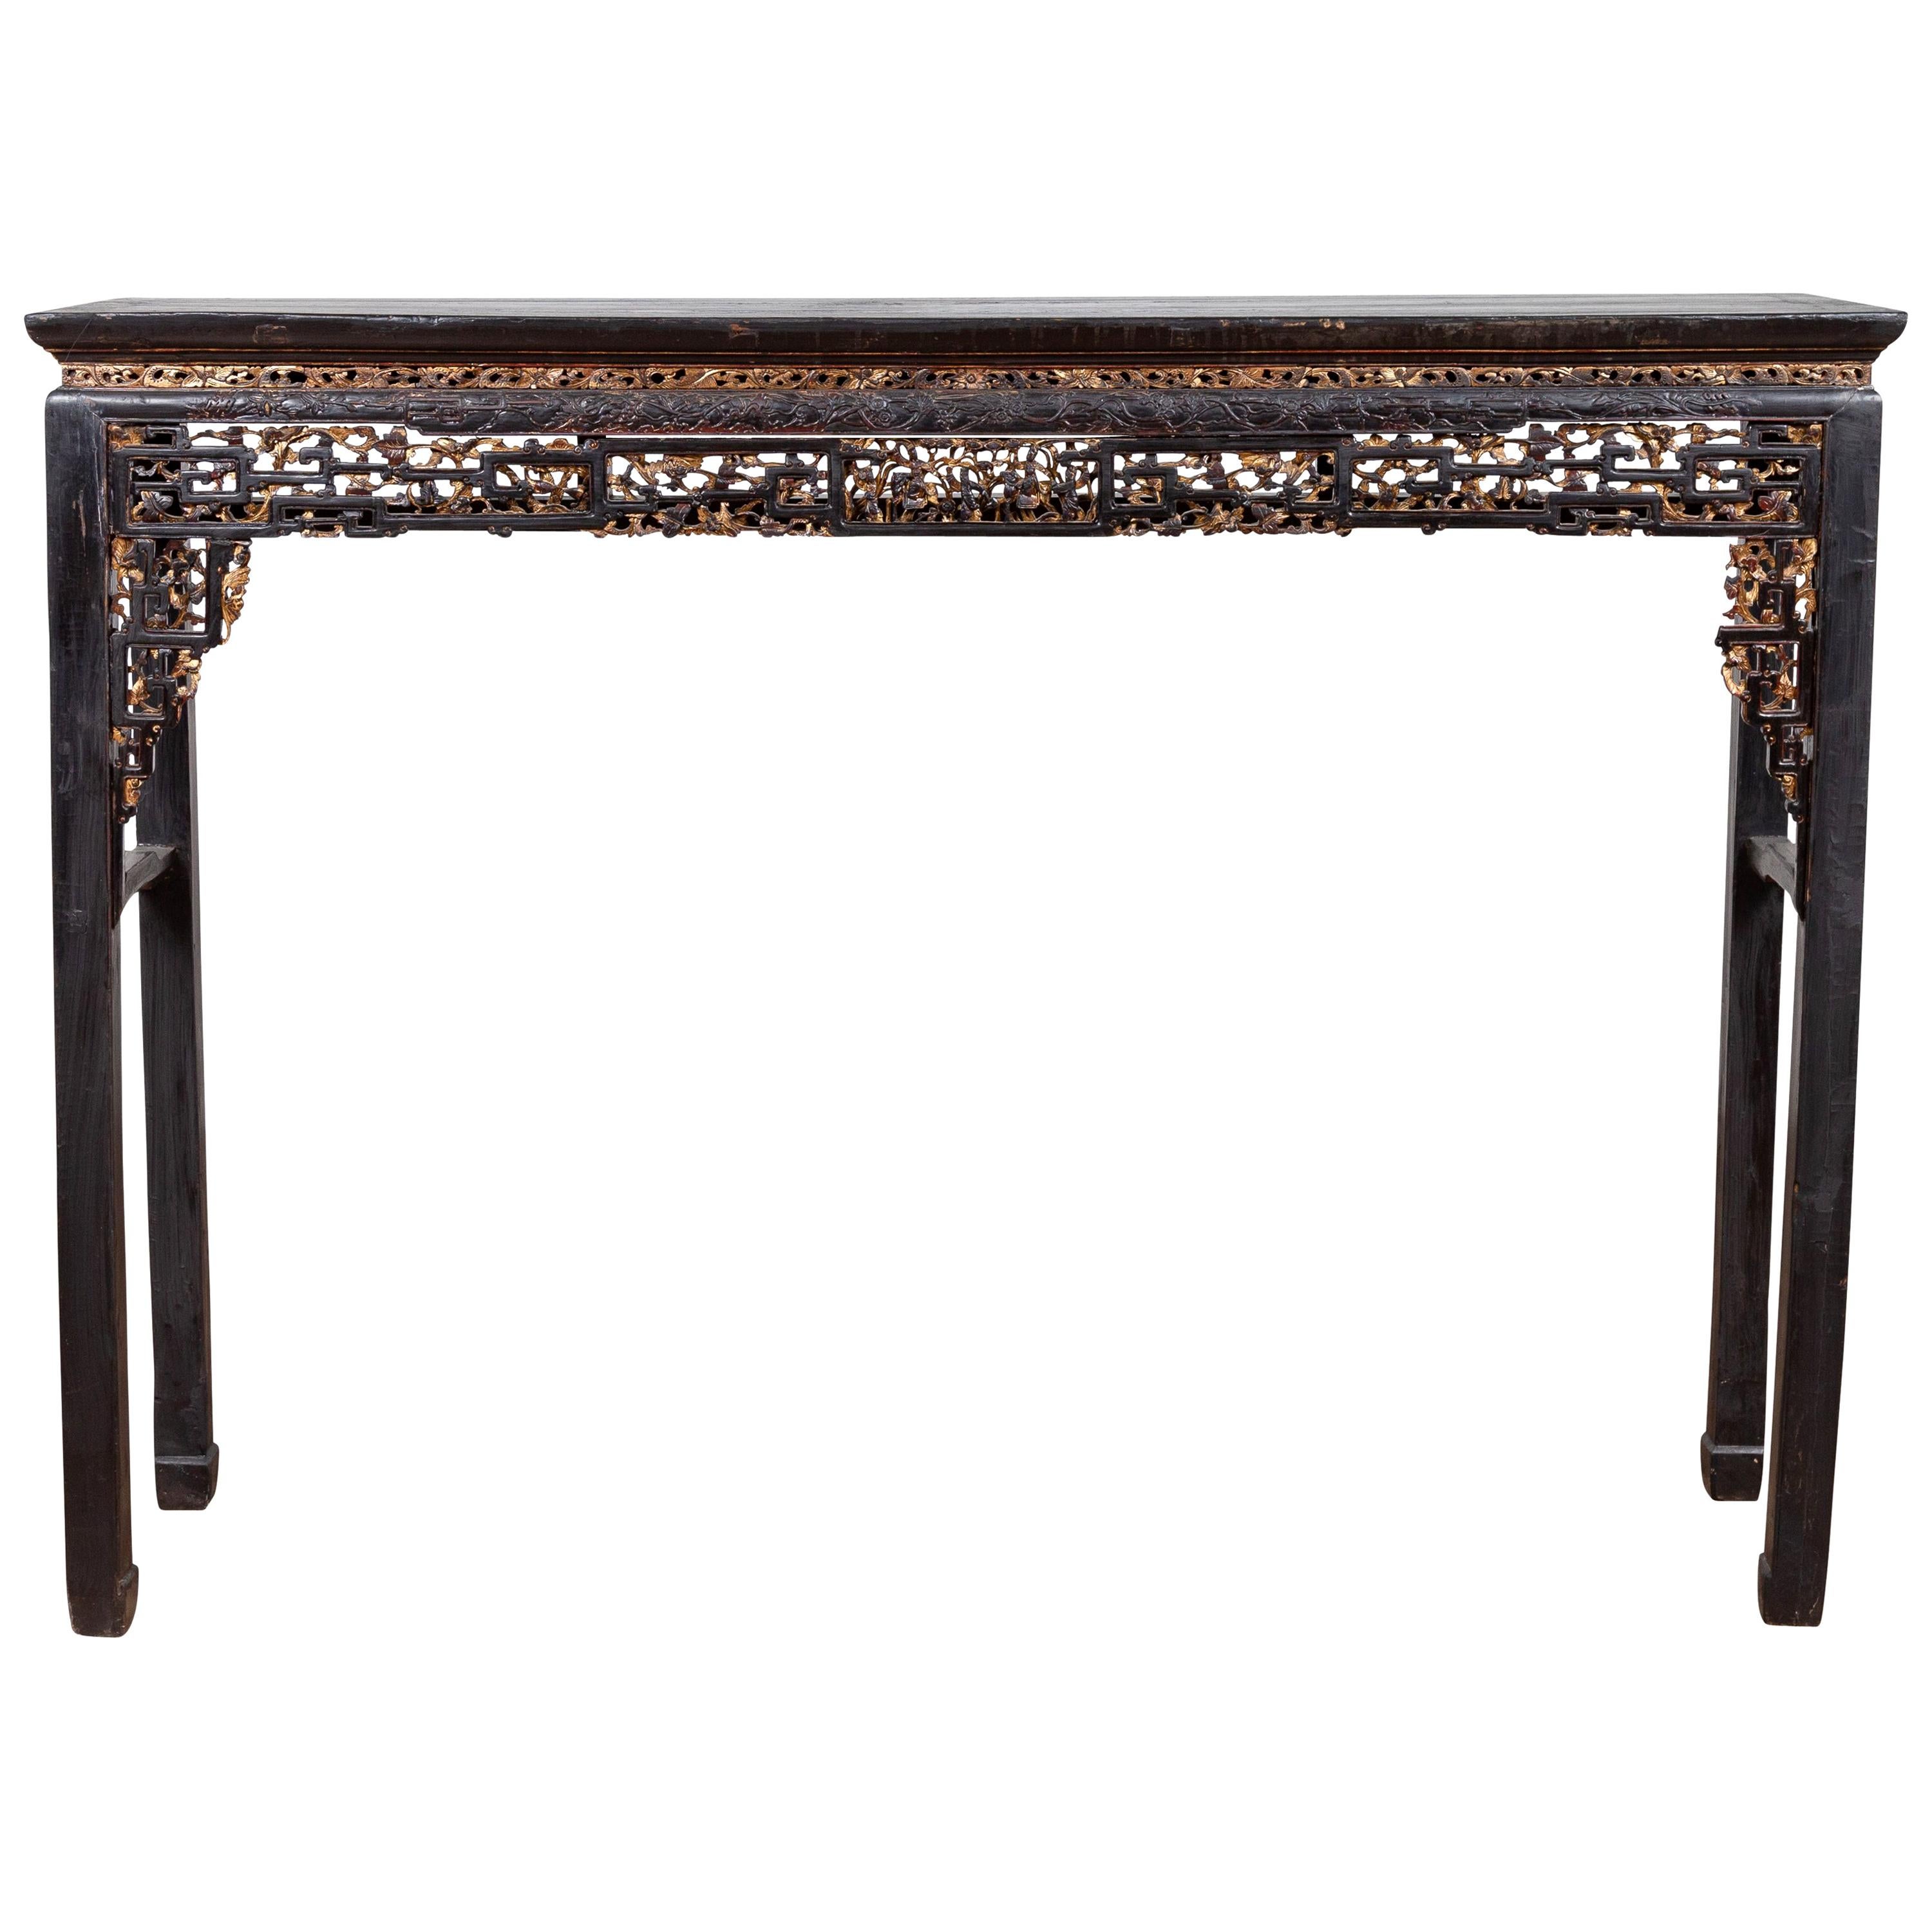 Chinese Antique Parcel-Gilt Black Altar Console Table with Carved Floral Décor